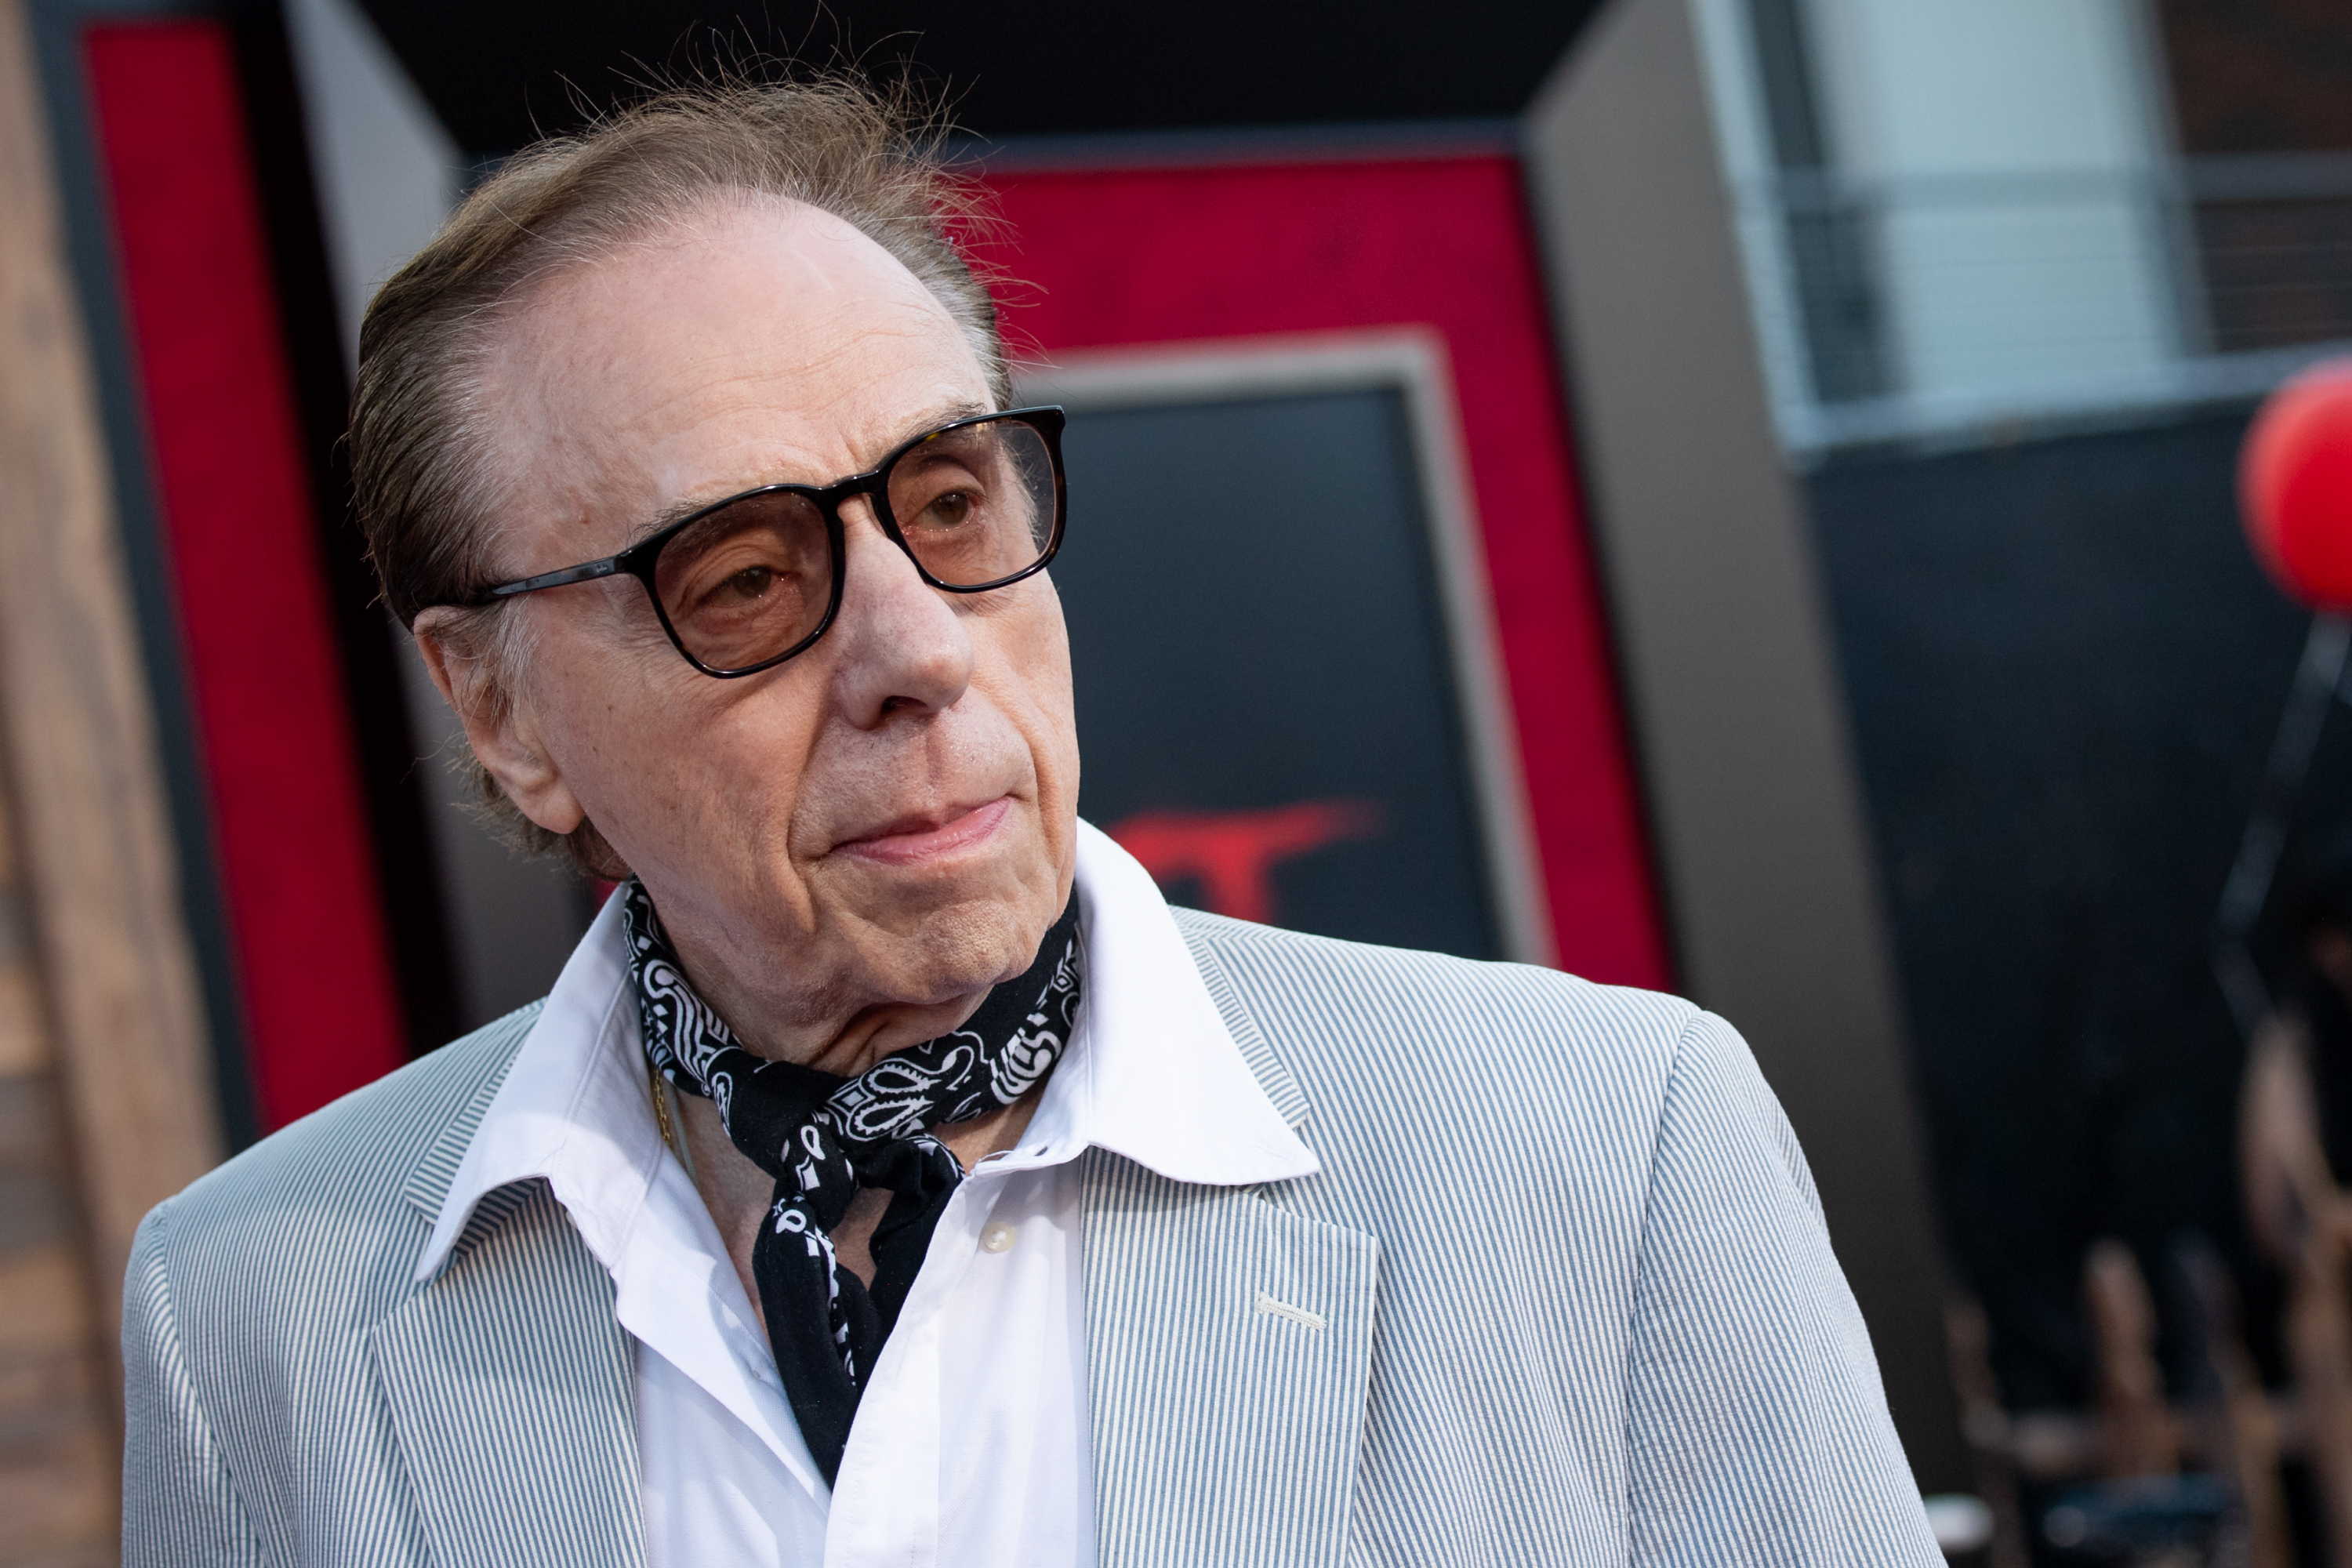 Peter Bogdanovich, Director Of ‘Last Picture Show’ And ‘Paper Moon,’ Dies At 82